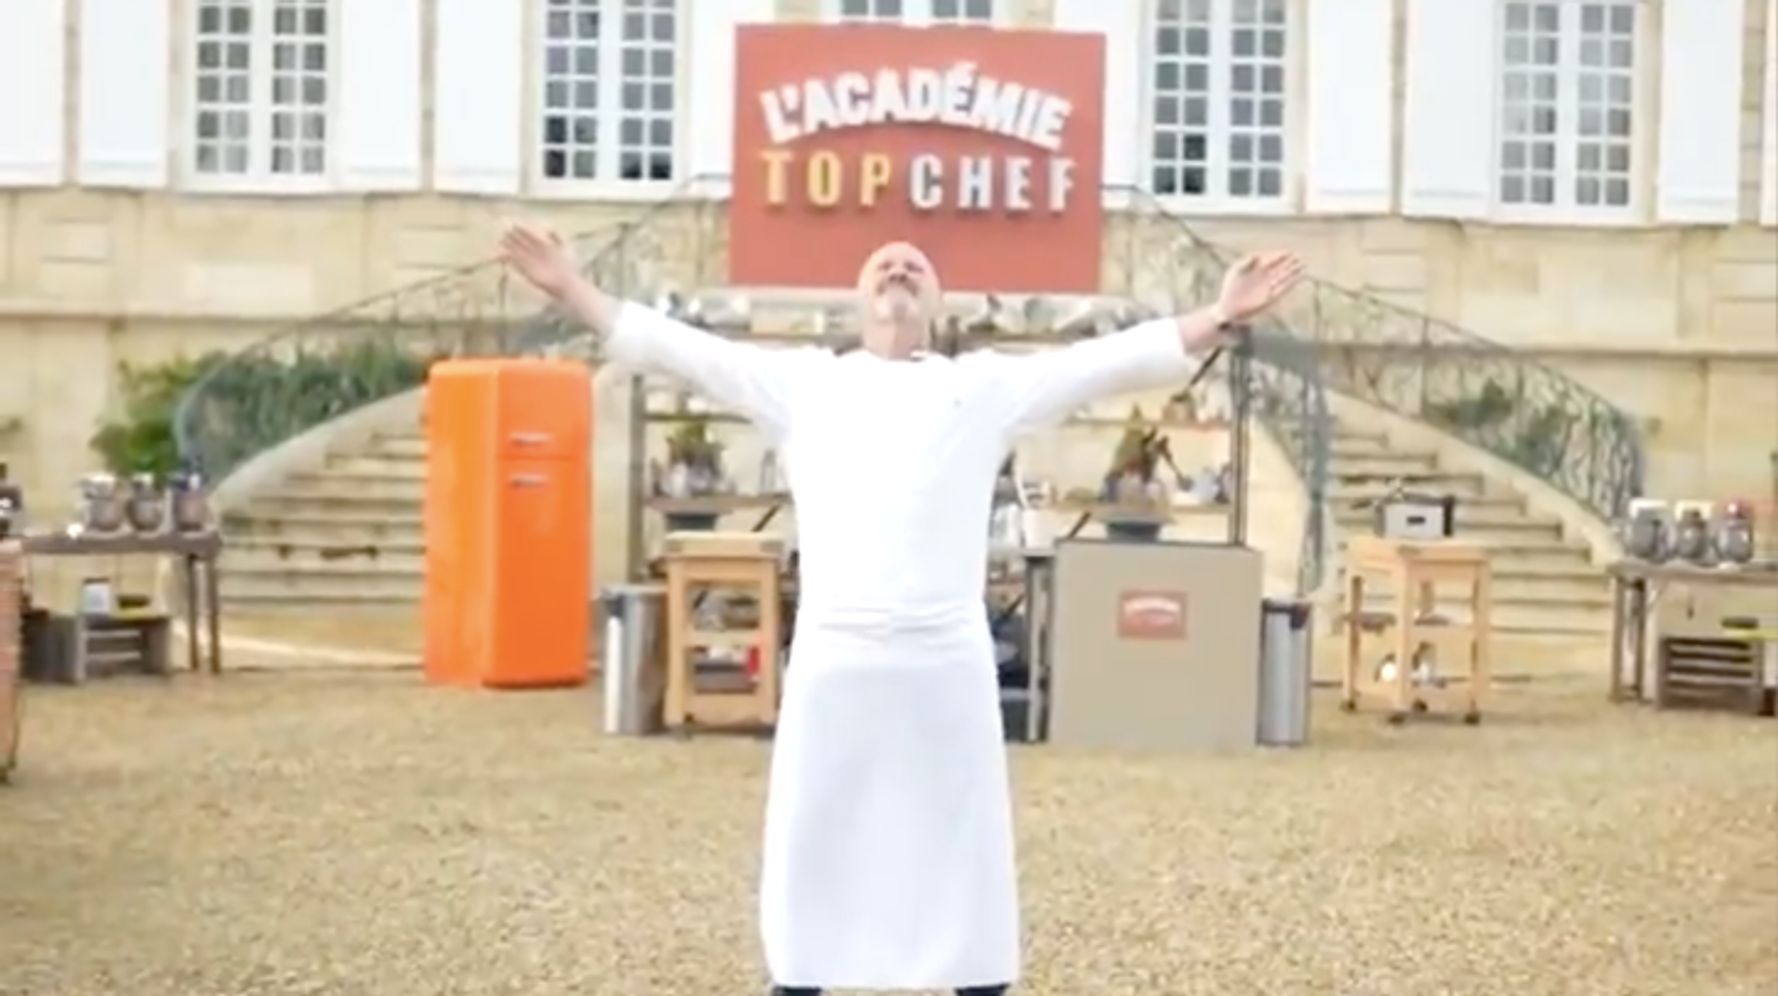 philippe etchebest ouvre son academie top chef sur m6 le huffpost